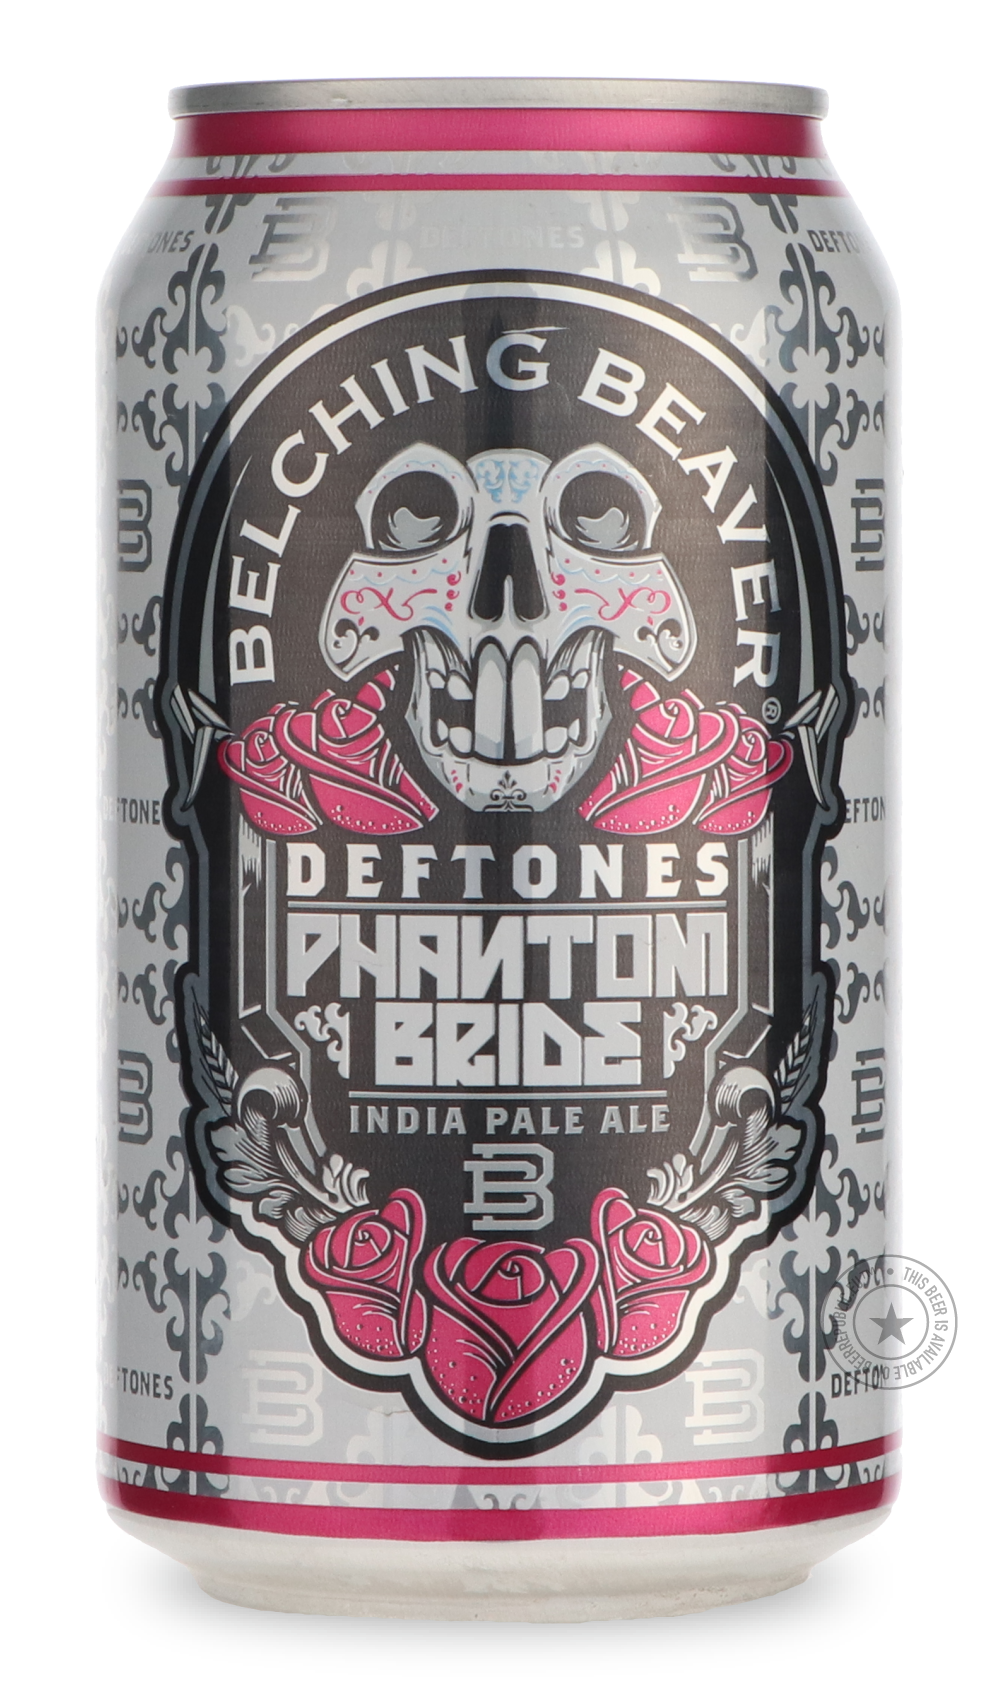 -Belching Beaver- Deftones Phantom Bride-IPA- Only @ Beer Republic - The best online beer store for American & Canadian craft beer - Buy beer online from the USA and Canada - Bier online kopen - Amerikaans bier kopen - Craft beer store - Craft beer kopen - Amerikanisch bier kaufen - Bier online kaufen - Acheter biere online - IPA - Stout - Porter - New England IPA - Hazy IPA - Imperial Stout - Barrel Aged - Barrel Aged Imperial Stout - Brown - Dark beer - Blond - Blonde - Pilsner - Lager - Wheat - Weizen - 